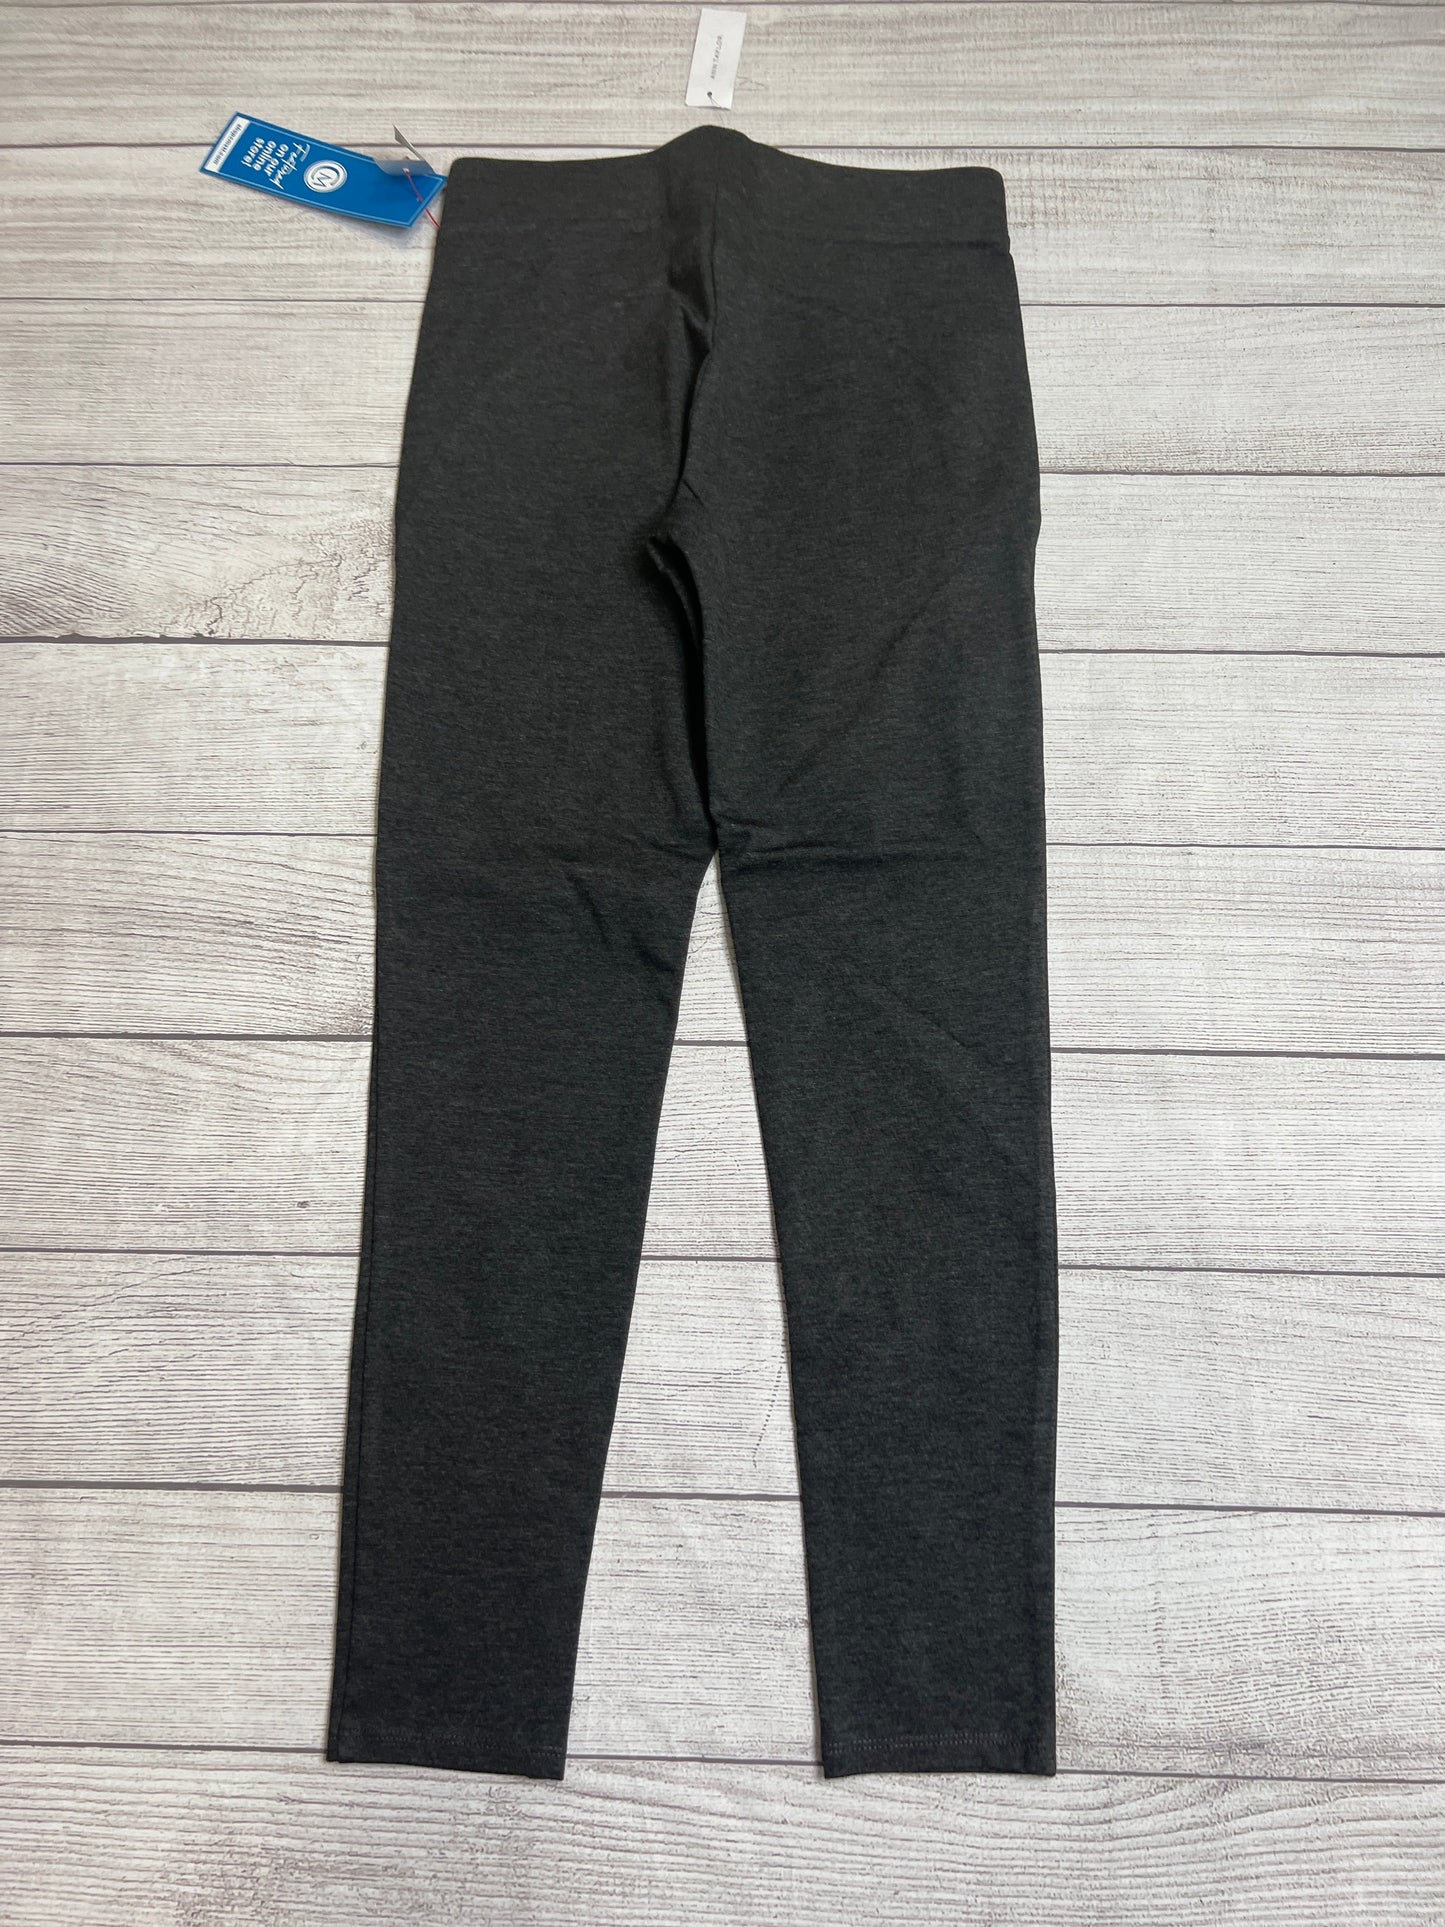 Pants Ankle By Ann Taylor  Size: S